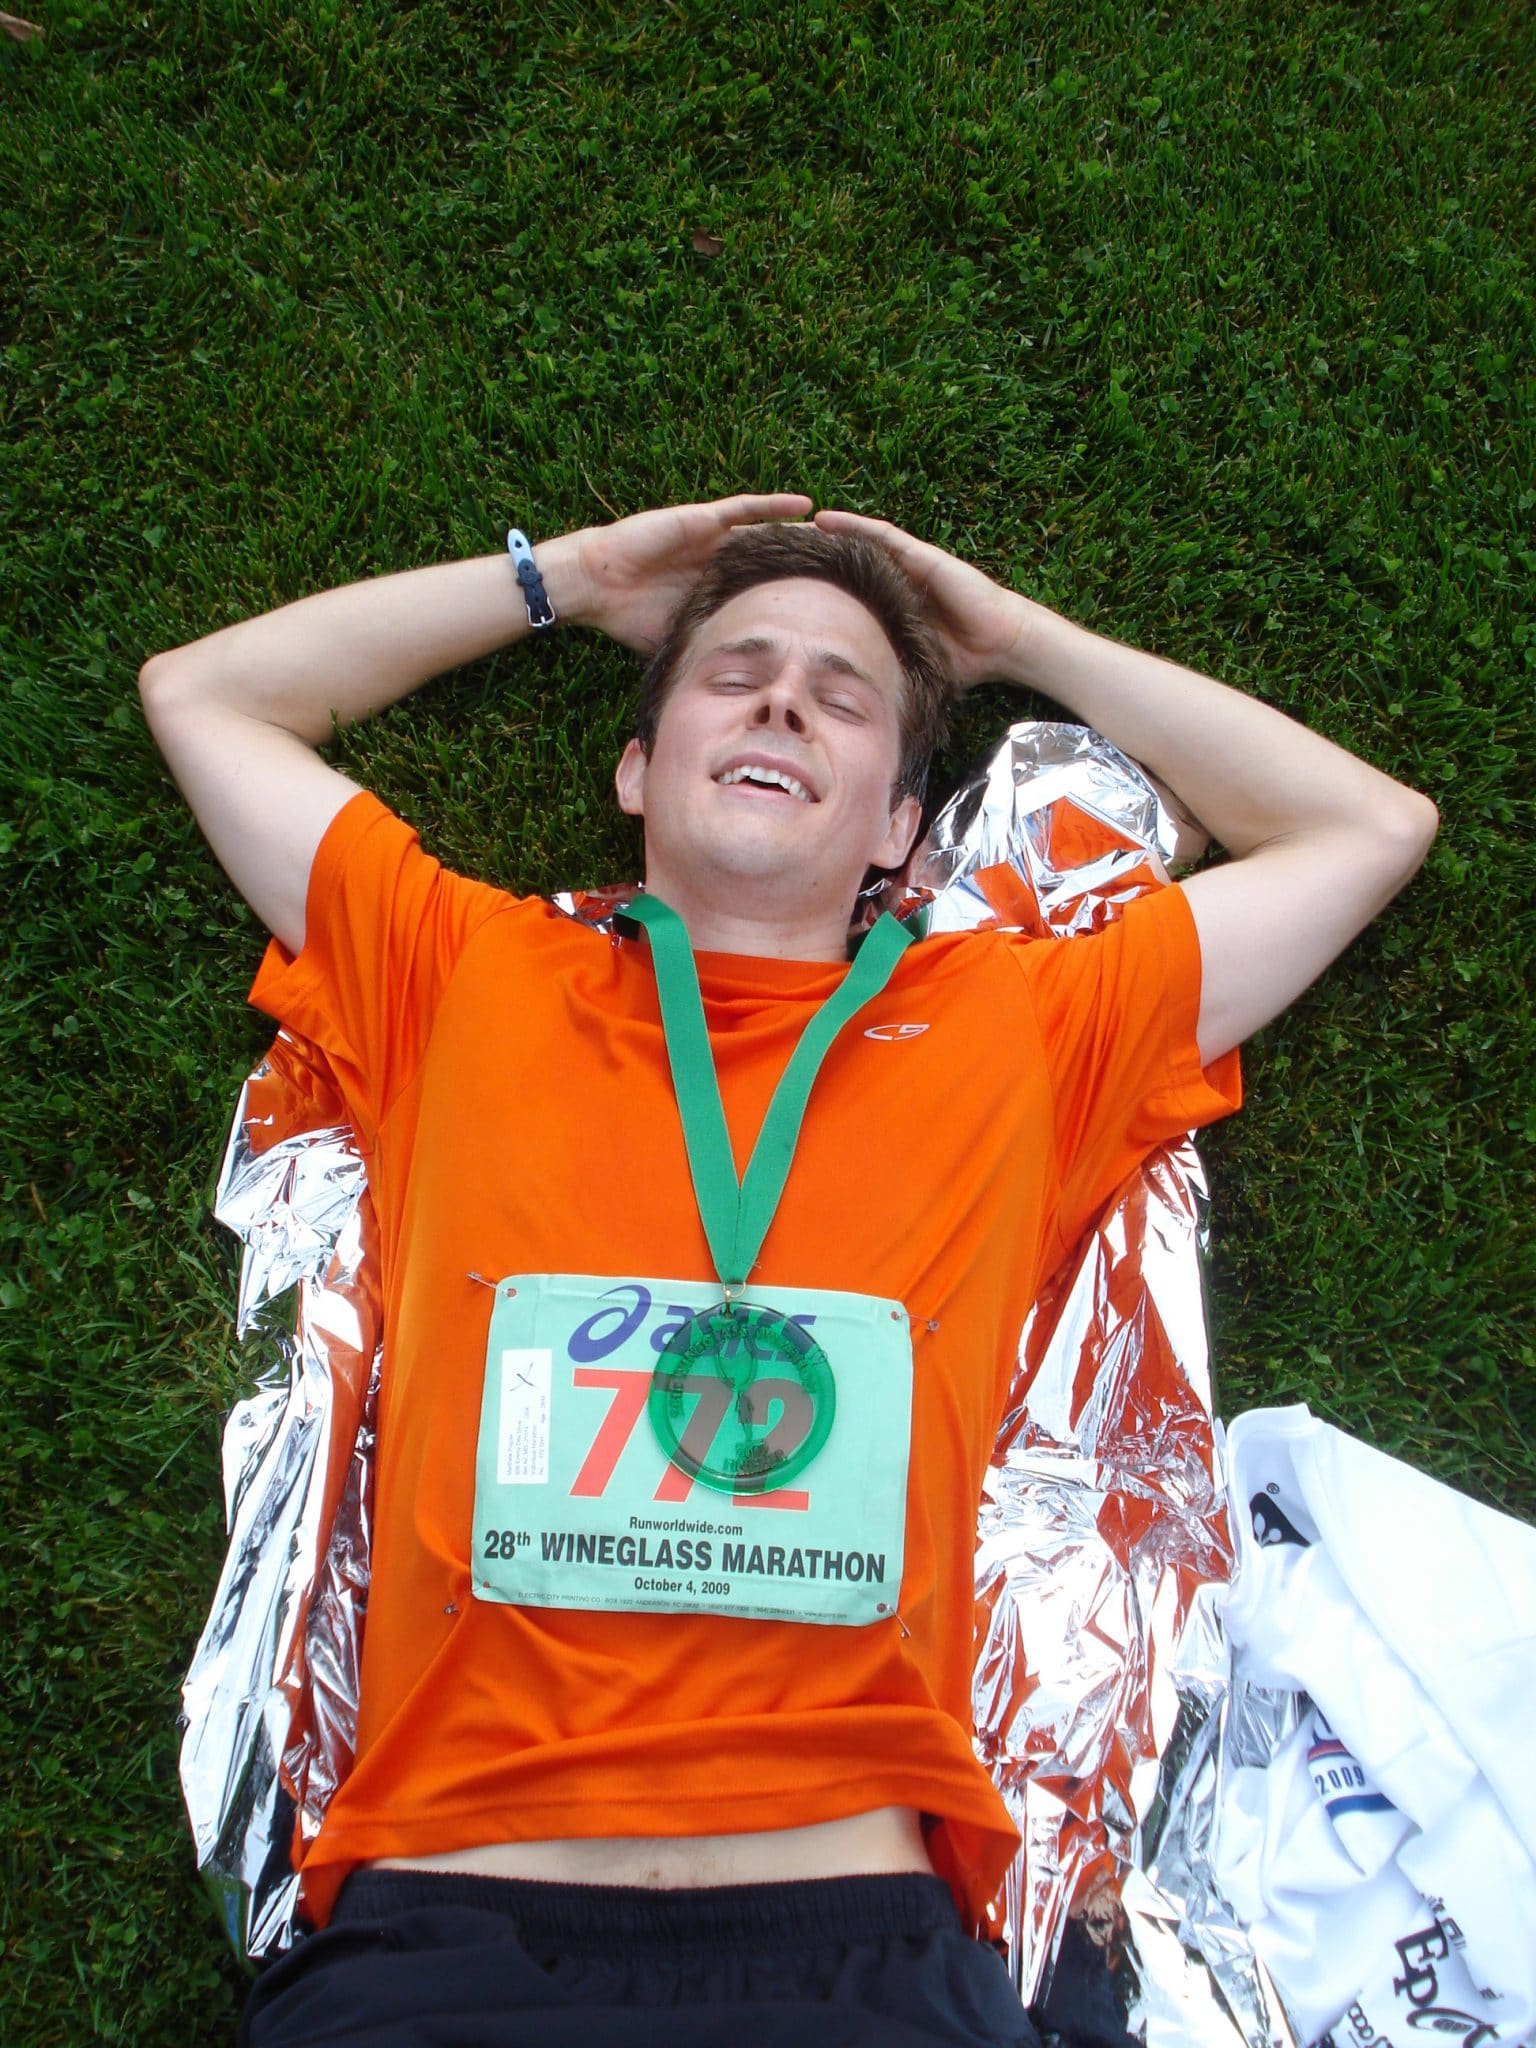 Matt laying in grass after completing Wineglass Marathon and qualifying for Boston